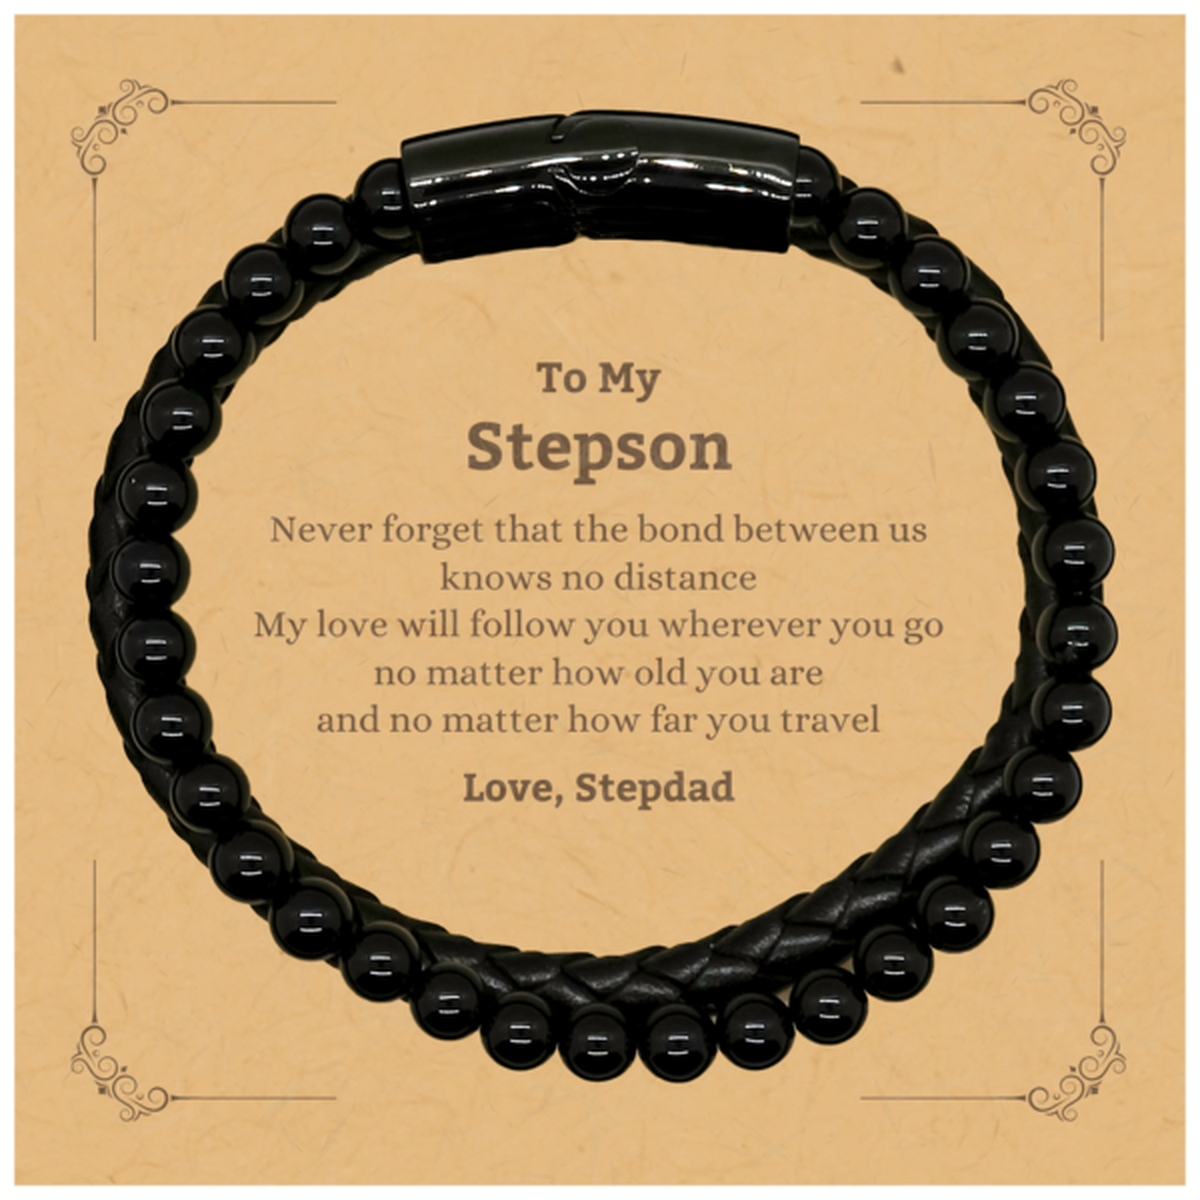 Stepson Birthday Gifts from Stepdad, Adjustable Stone Leather Bracelets for Stepson Christmas Graduation Unique Gifts Stepson Never forget that the bond between us knows no distance. Love, Stepdad